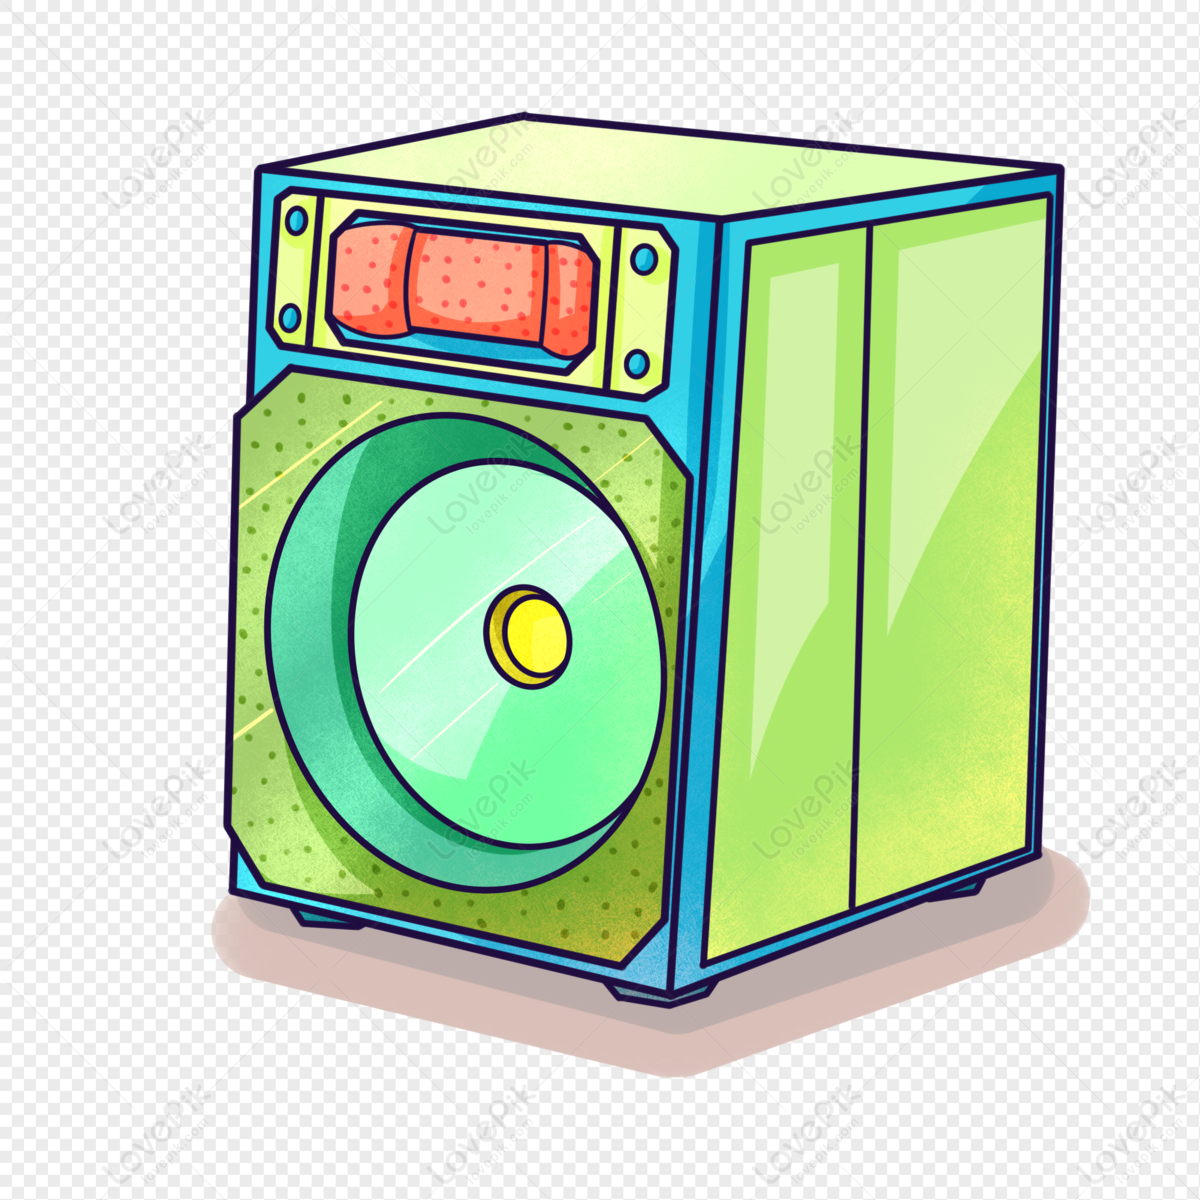 Cartoon Speaker Picture PNG Transparent And Clipart Image For Free Download  - Lovepik | 401571606